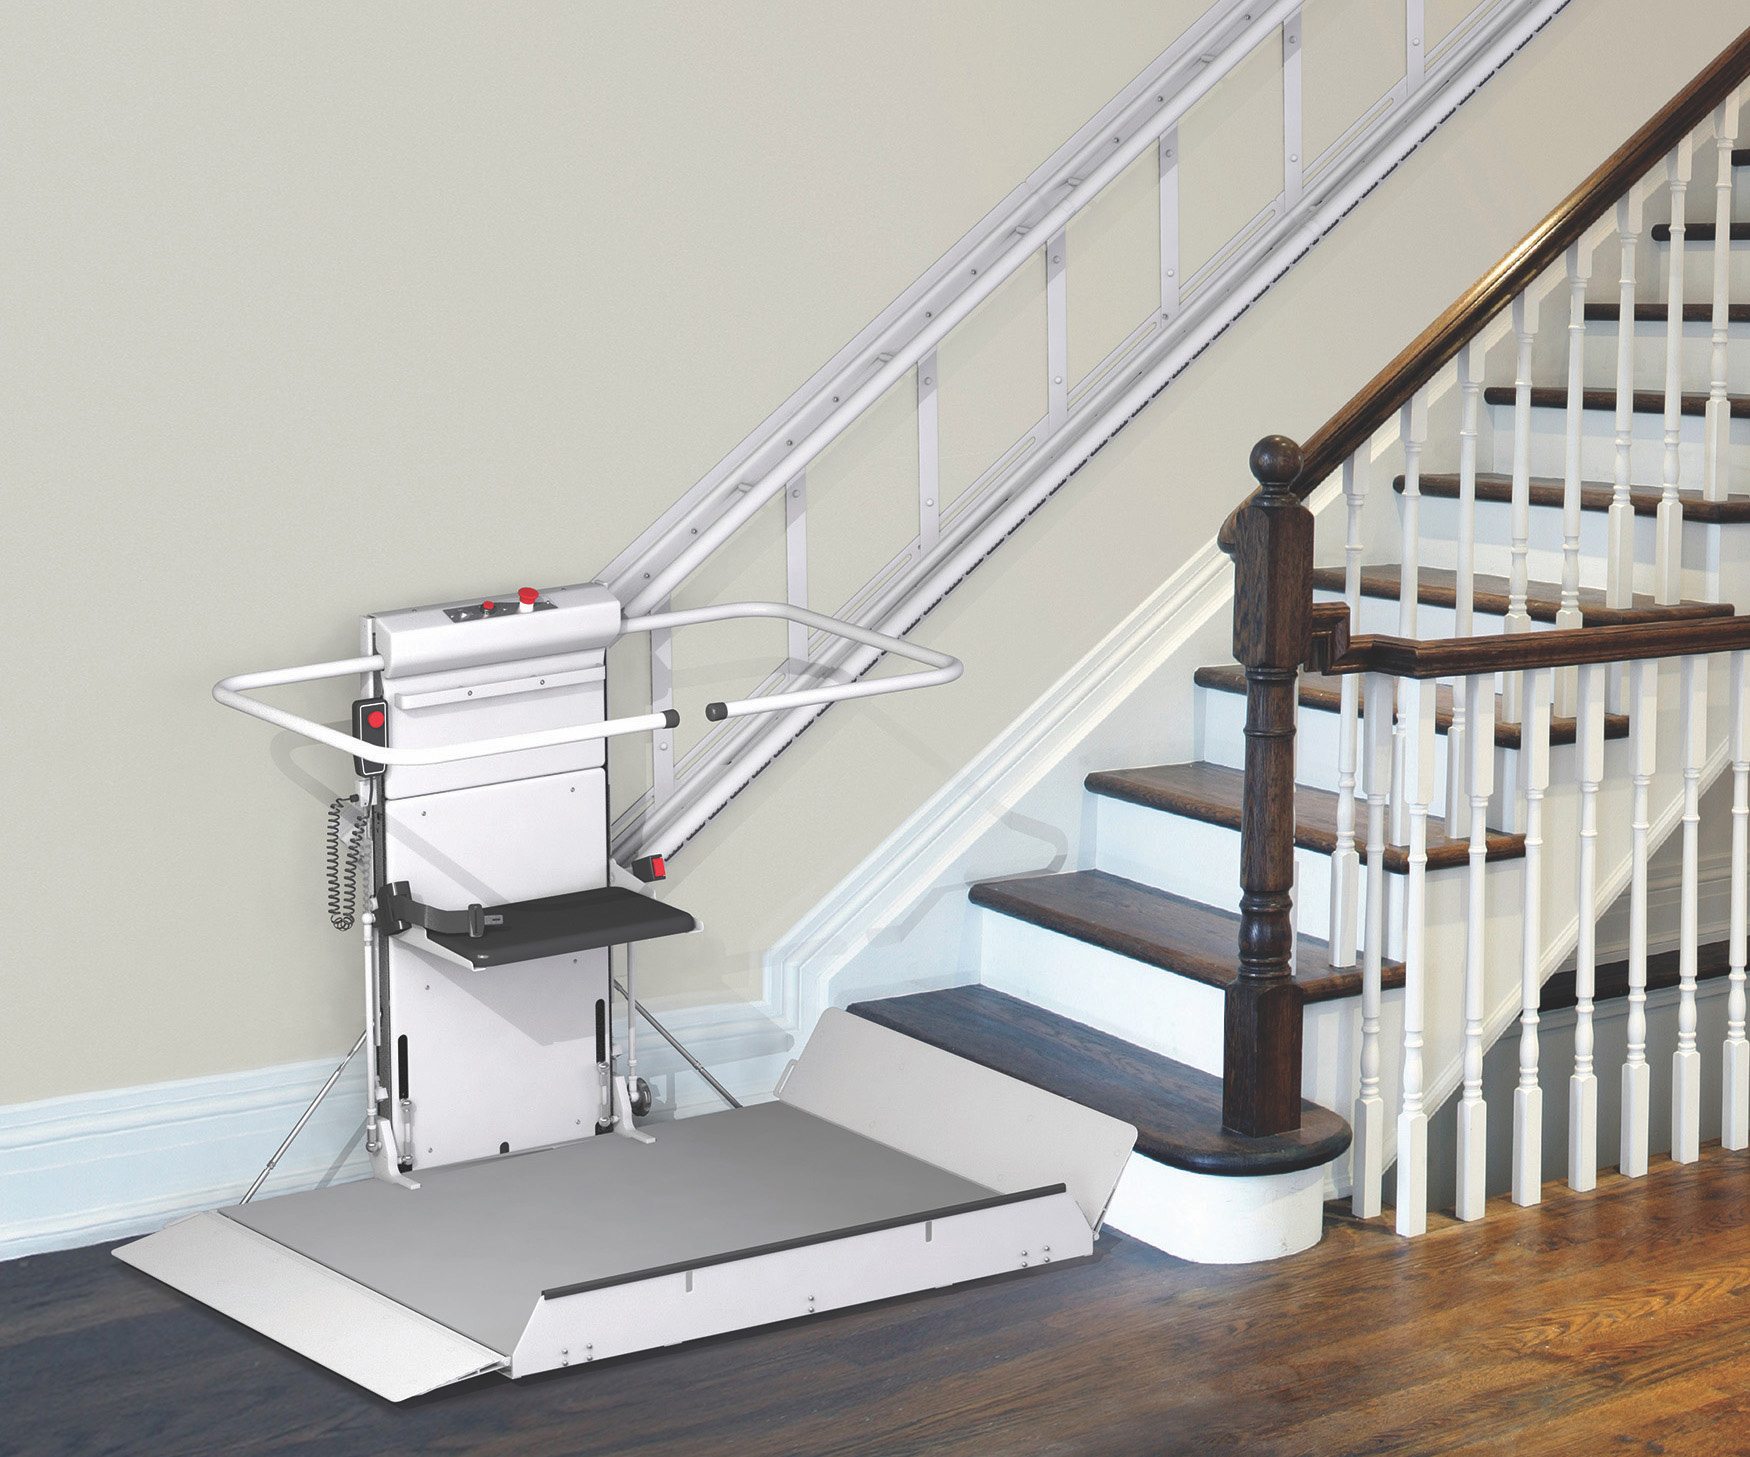 Inclined wheelchair lift installation on stair case